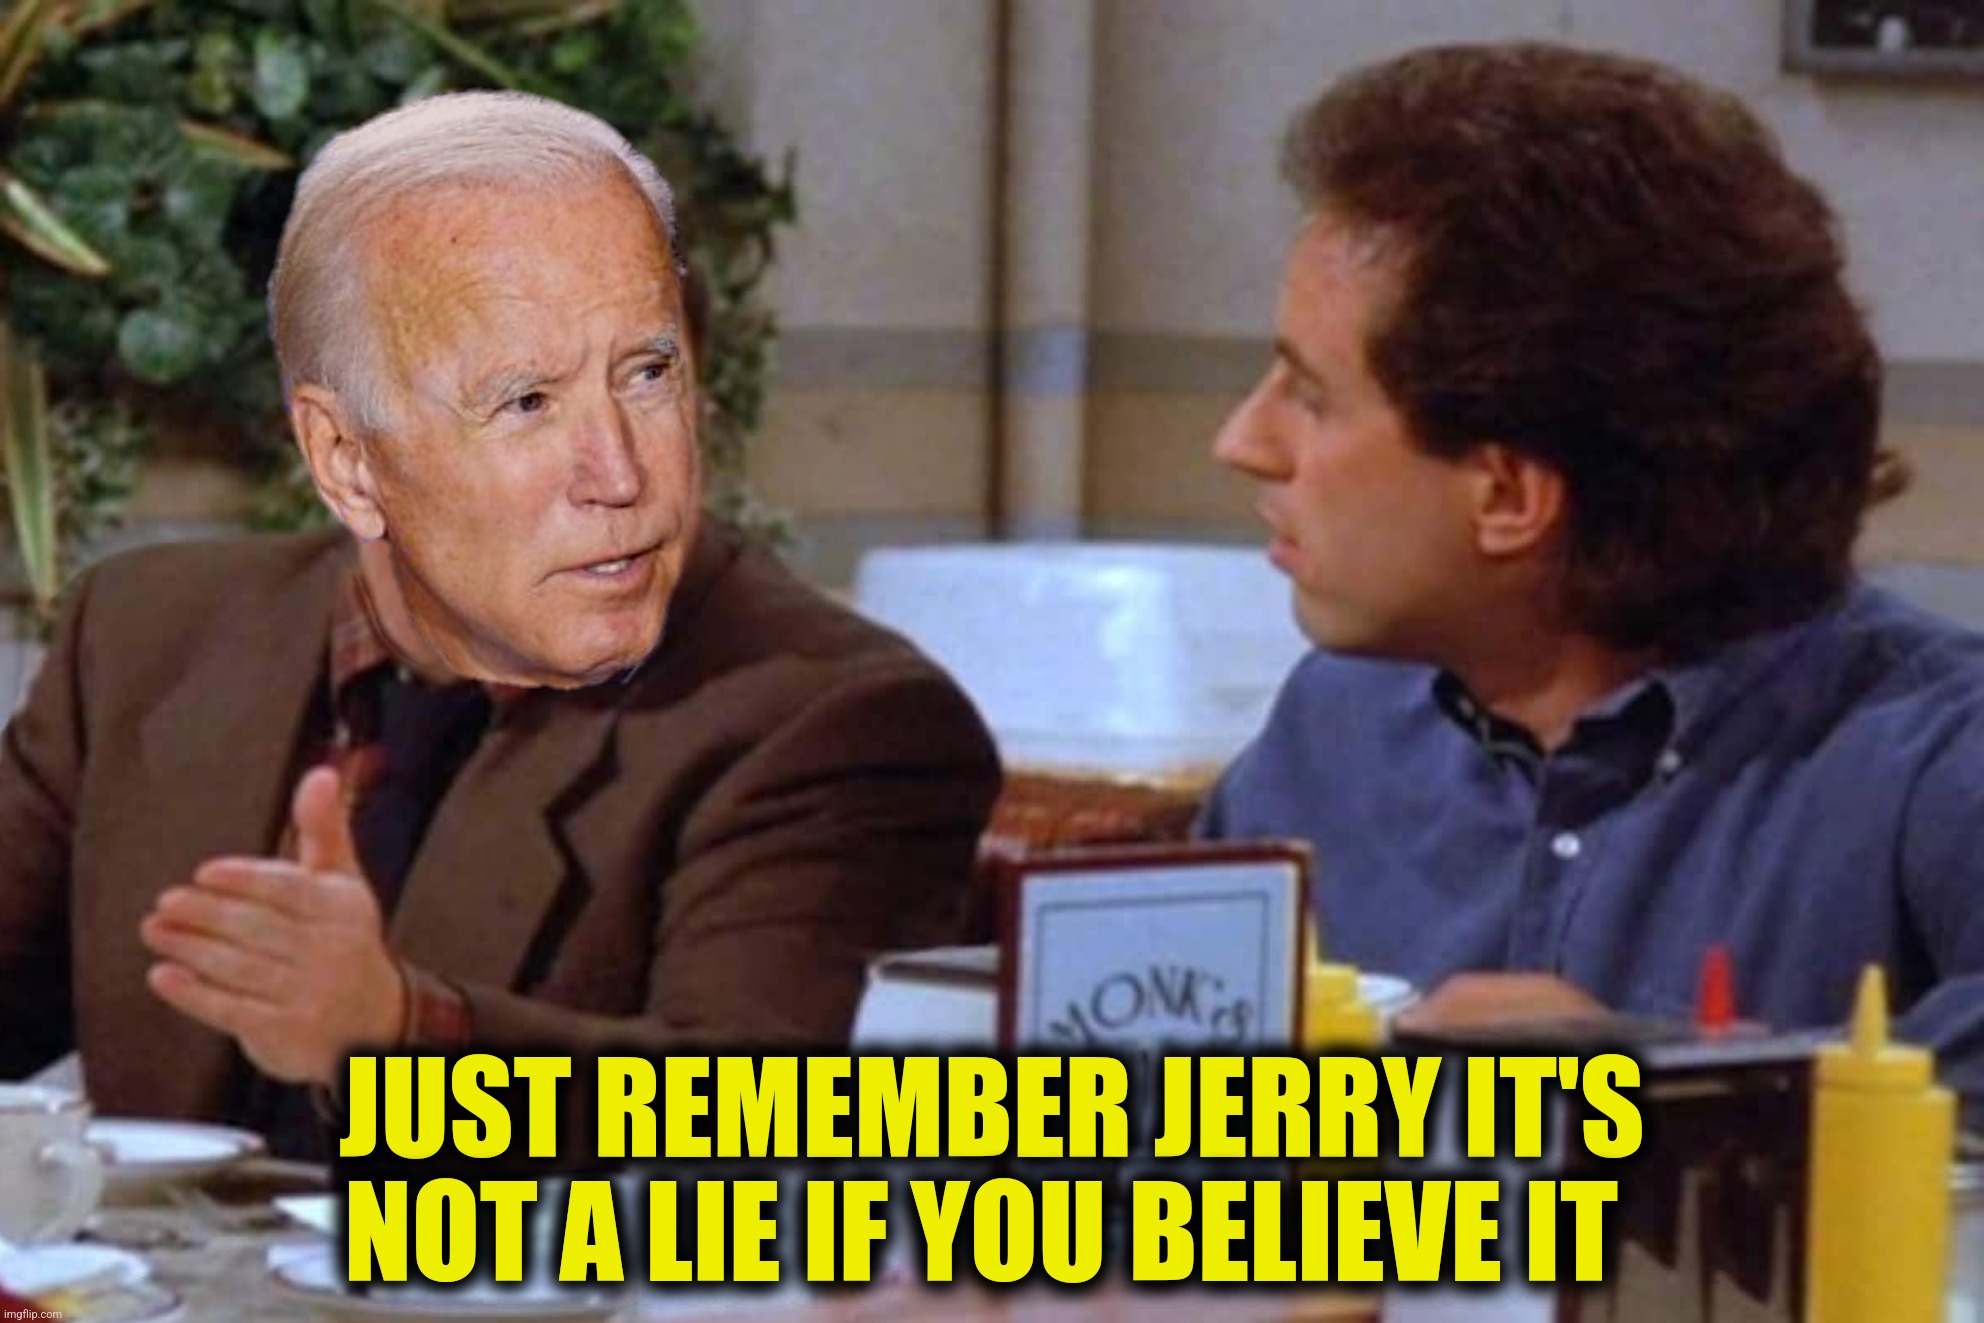 JUST REMEMBER JERRY IT'S NOT A LIE IF YOU BELIEVE IT | made w/ Imgflip meme maker